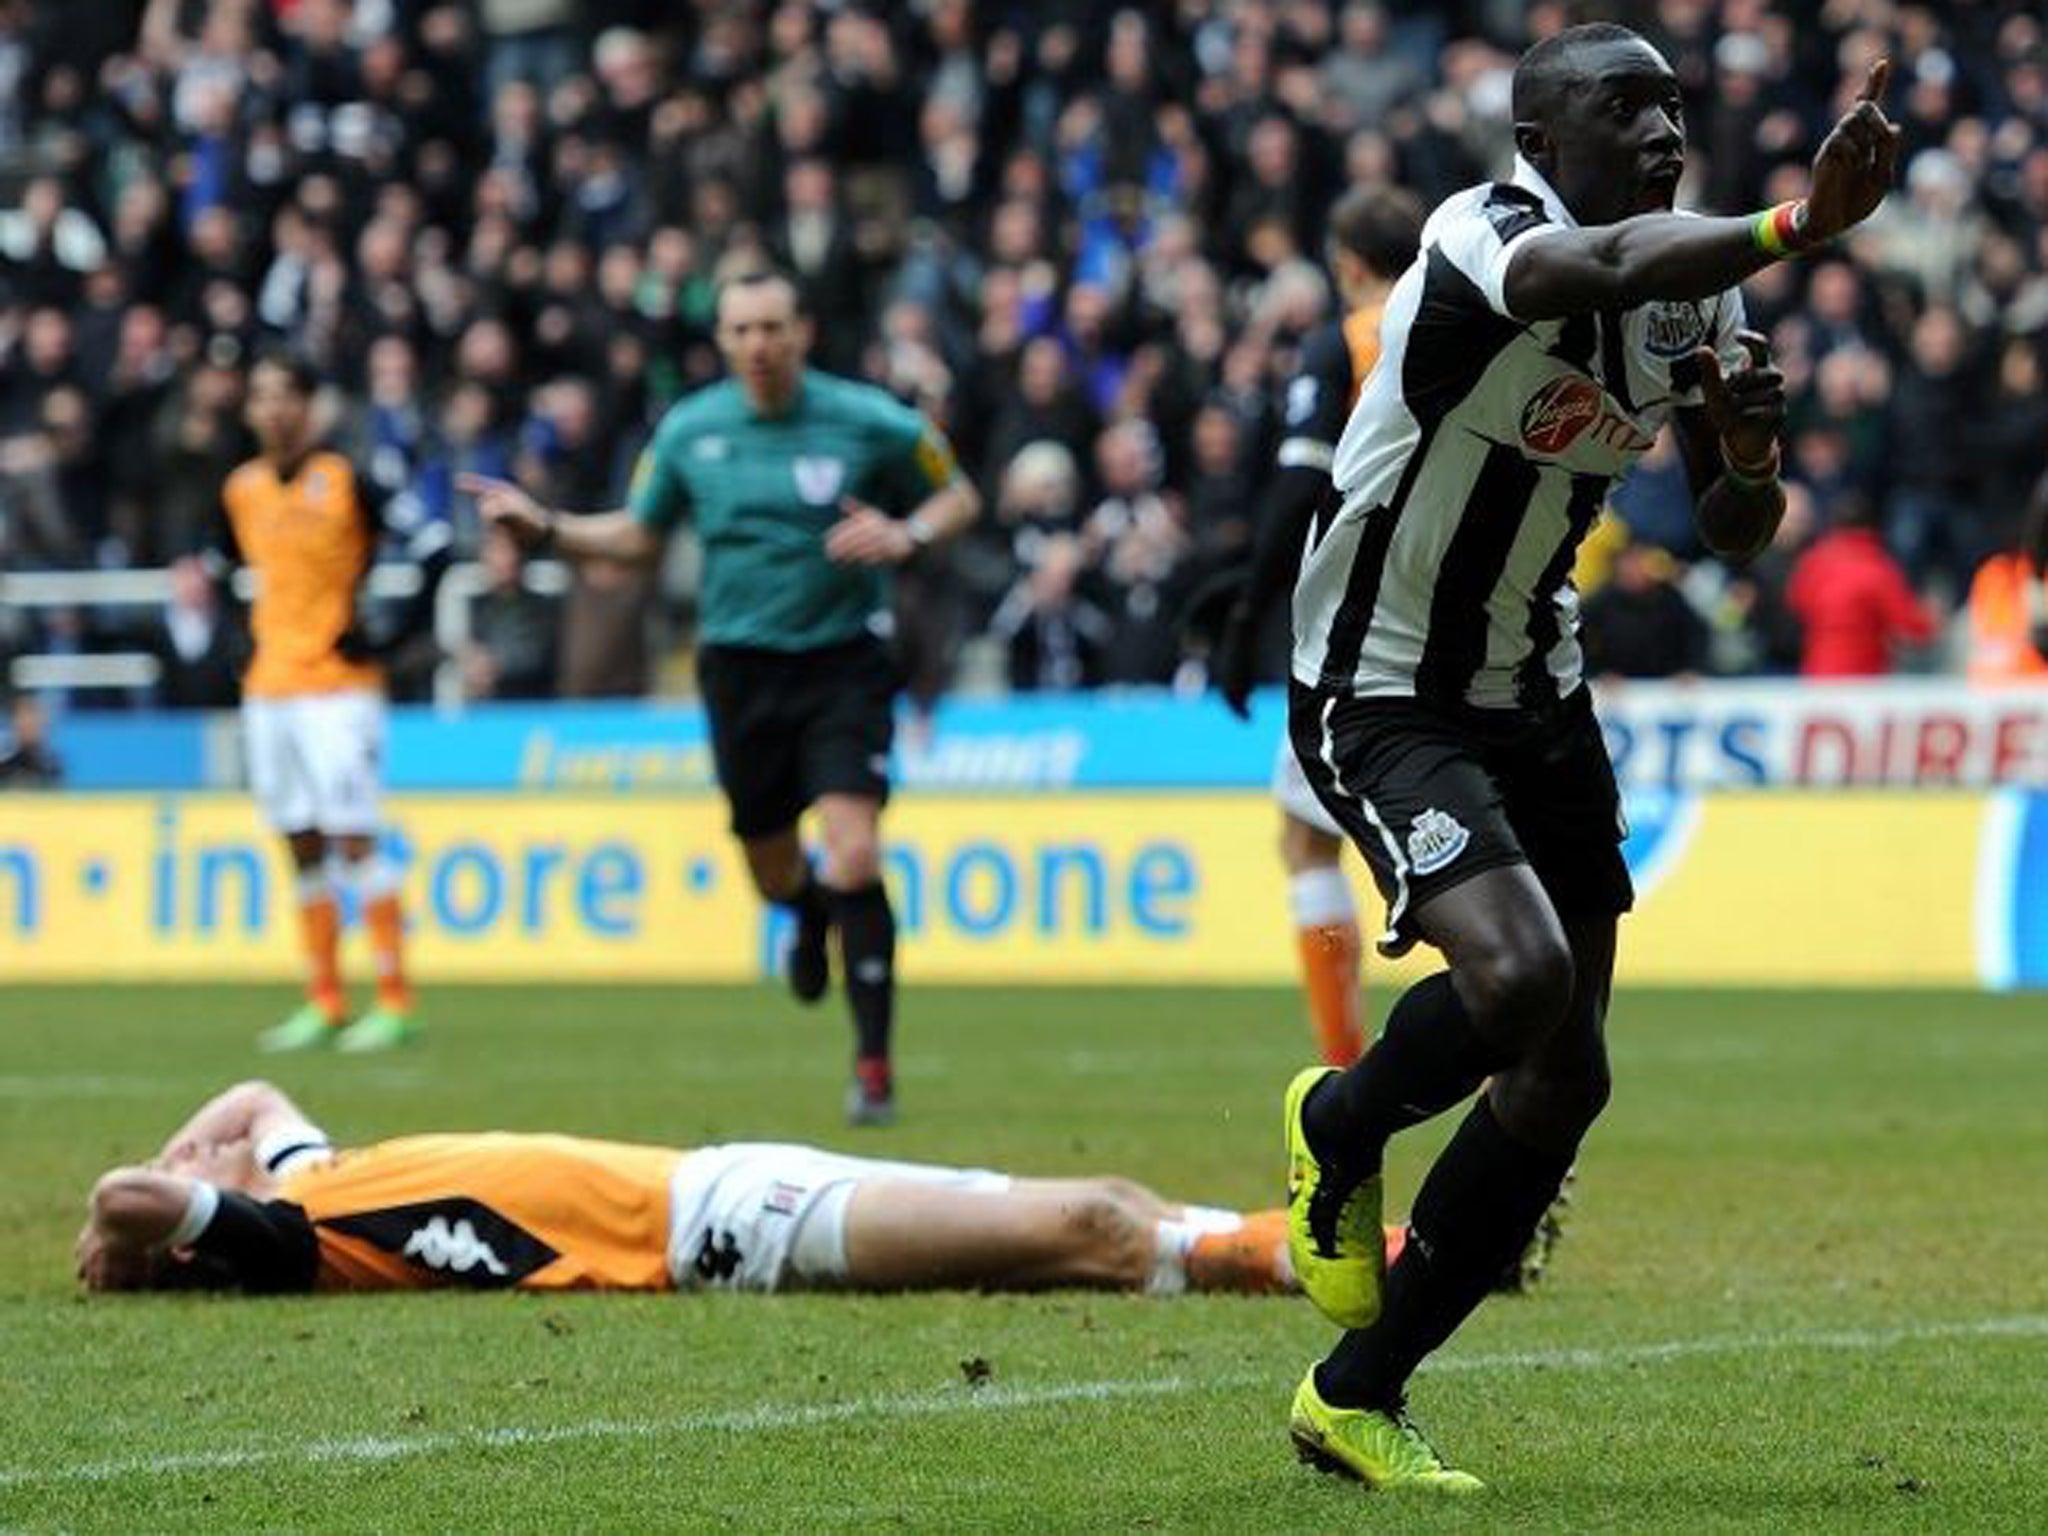 Papiss Cisse eased Newcastle's relegation fears with an injury-time winner against Fulham